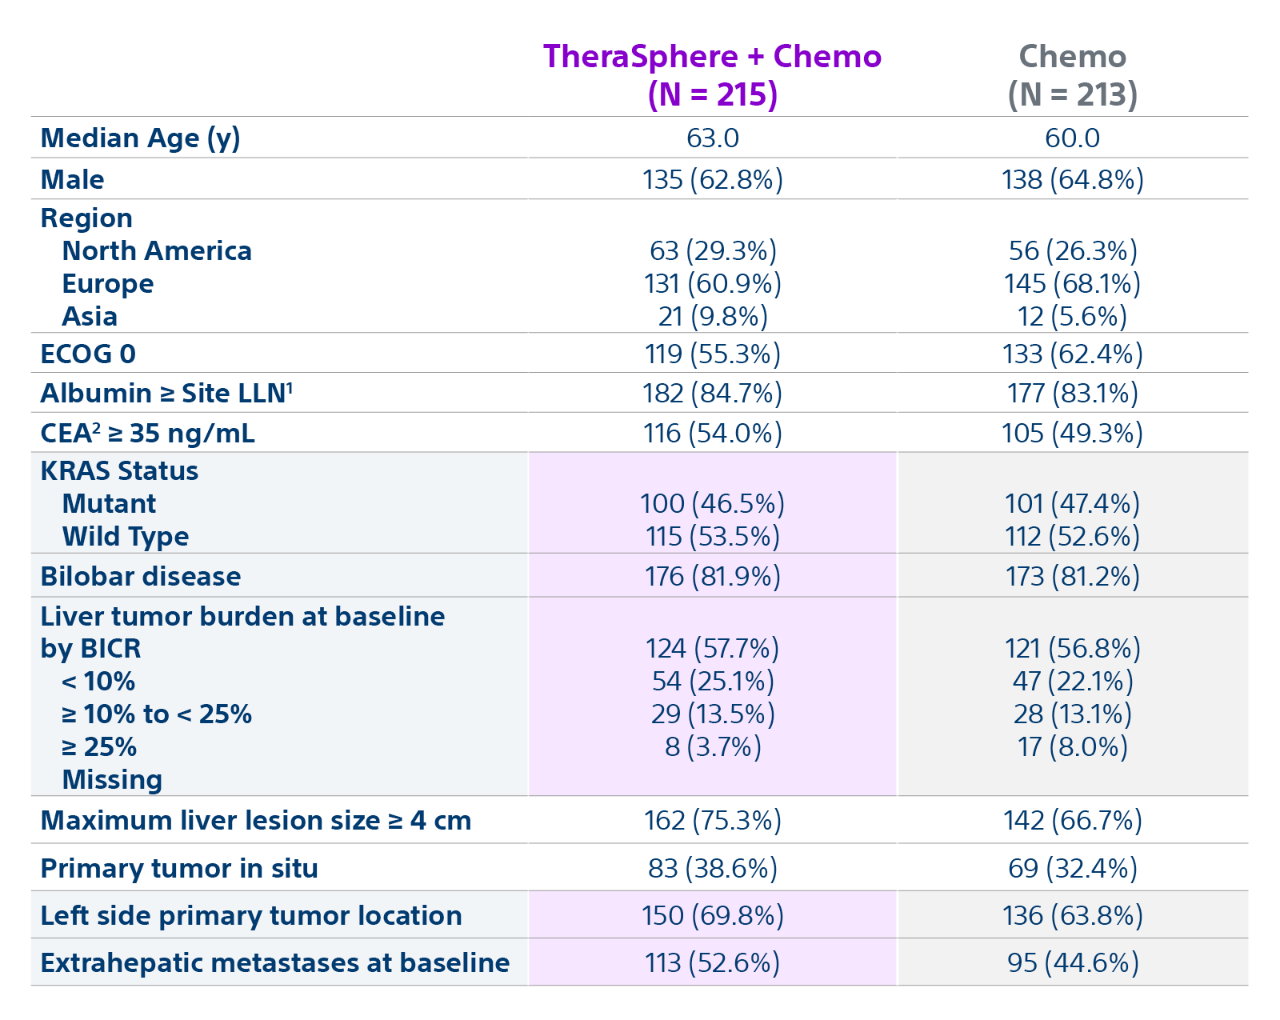 Table with TheraSphere and Chemo (N=215) and Chemo (N-213) with data on Median Age (y), Male, Region, ECOG 0, Albumin >= Site LLN, CEA >= 35 ng/mL, KRAS Status, Bilobar disease, Tumor replacement at baseline by BICR, Maximum liver lesion size >= 4 cm, Primary tumor in situ, Left side primary tumor location, Extrahepatic Metastases at Baseline.